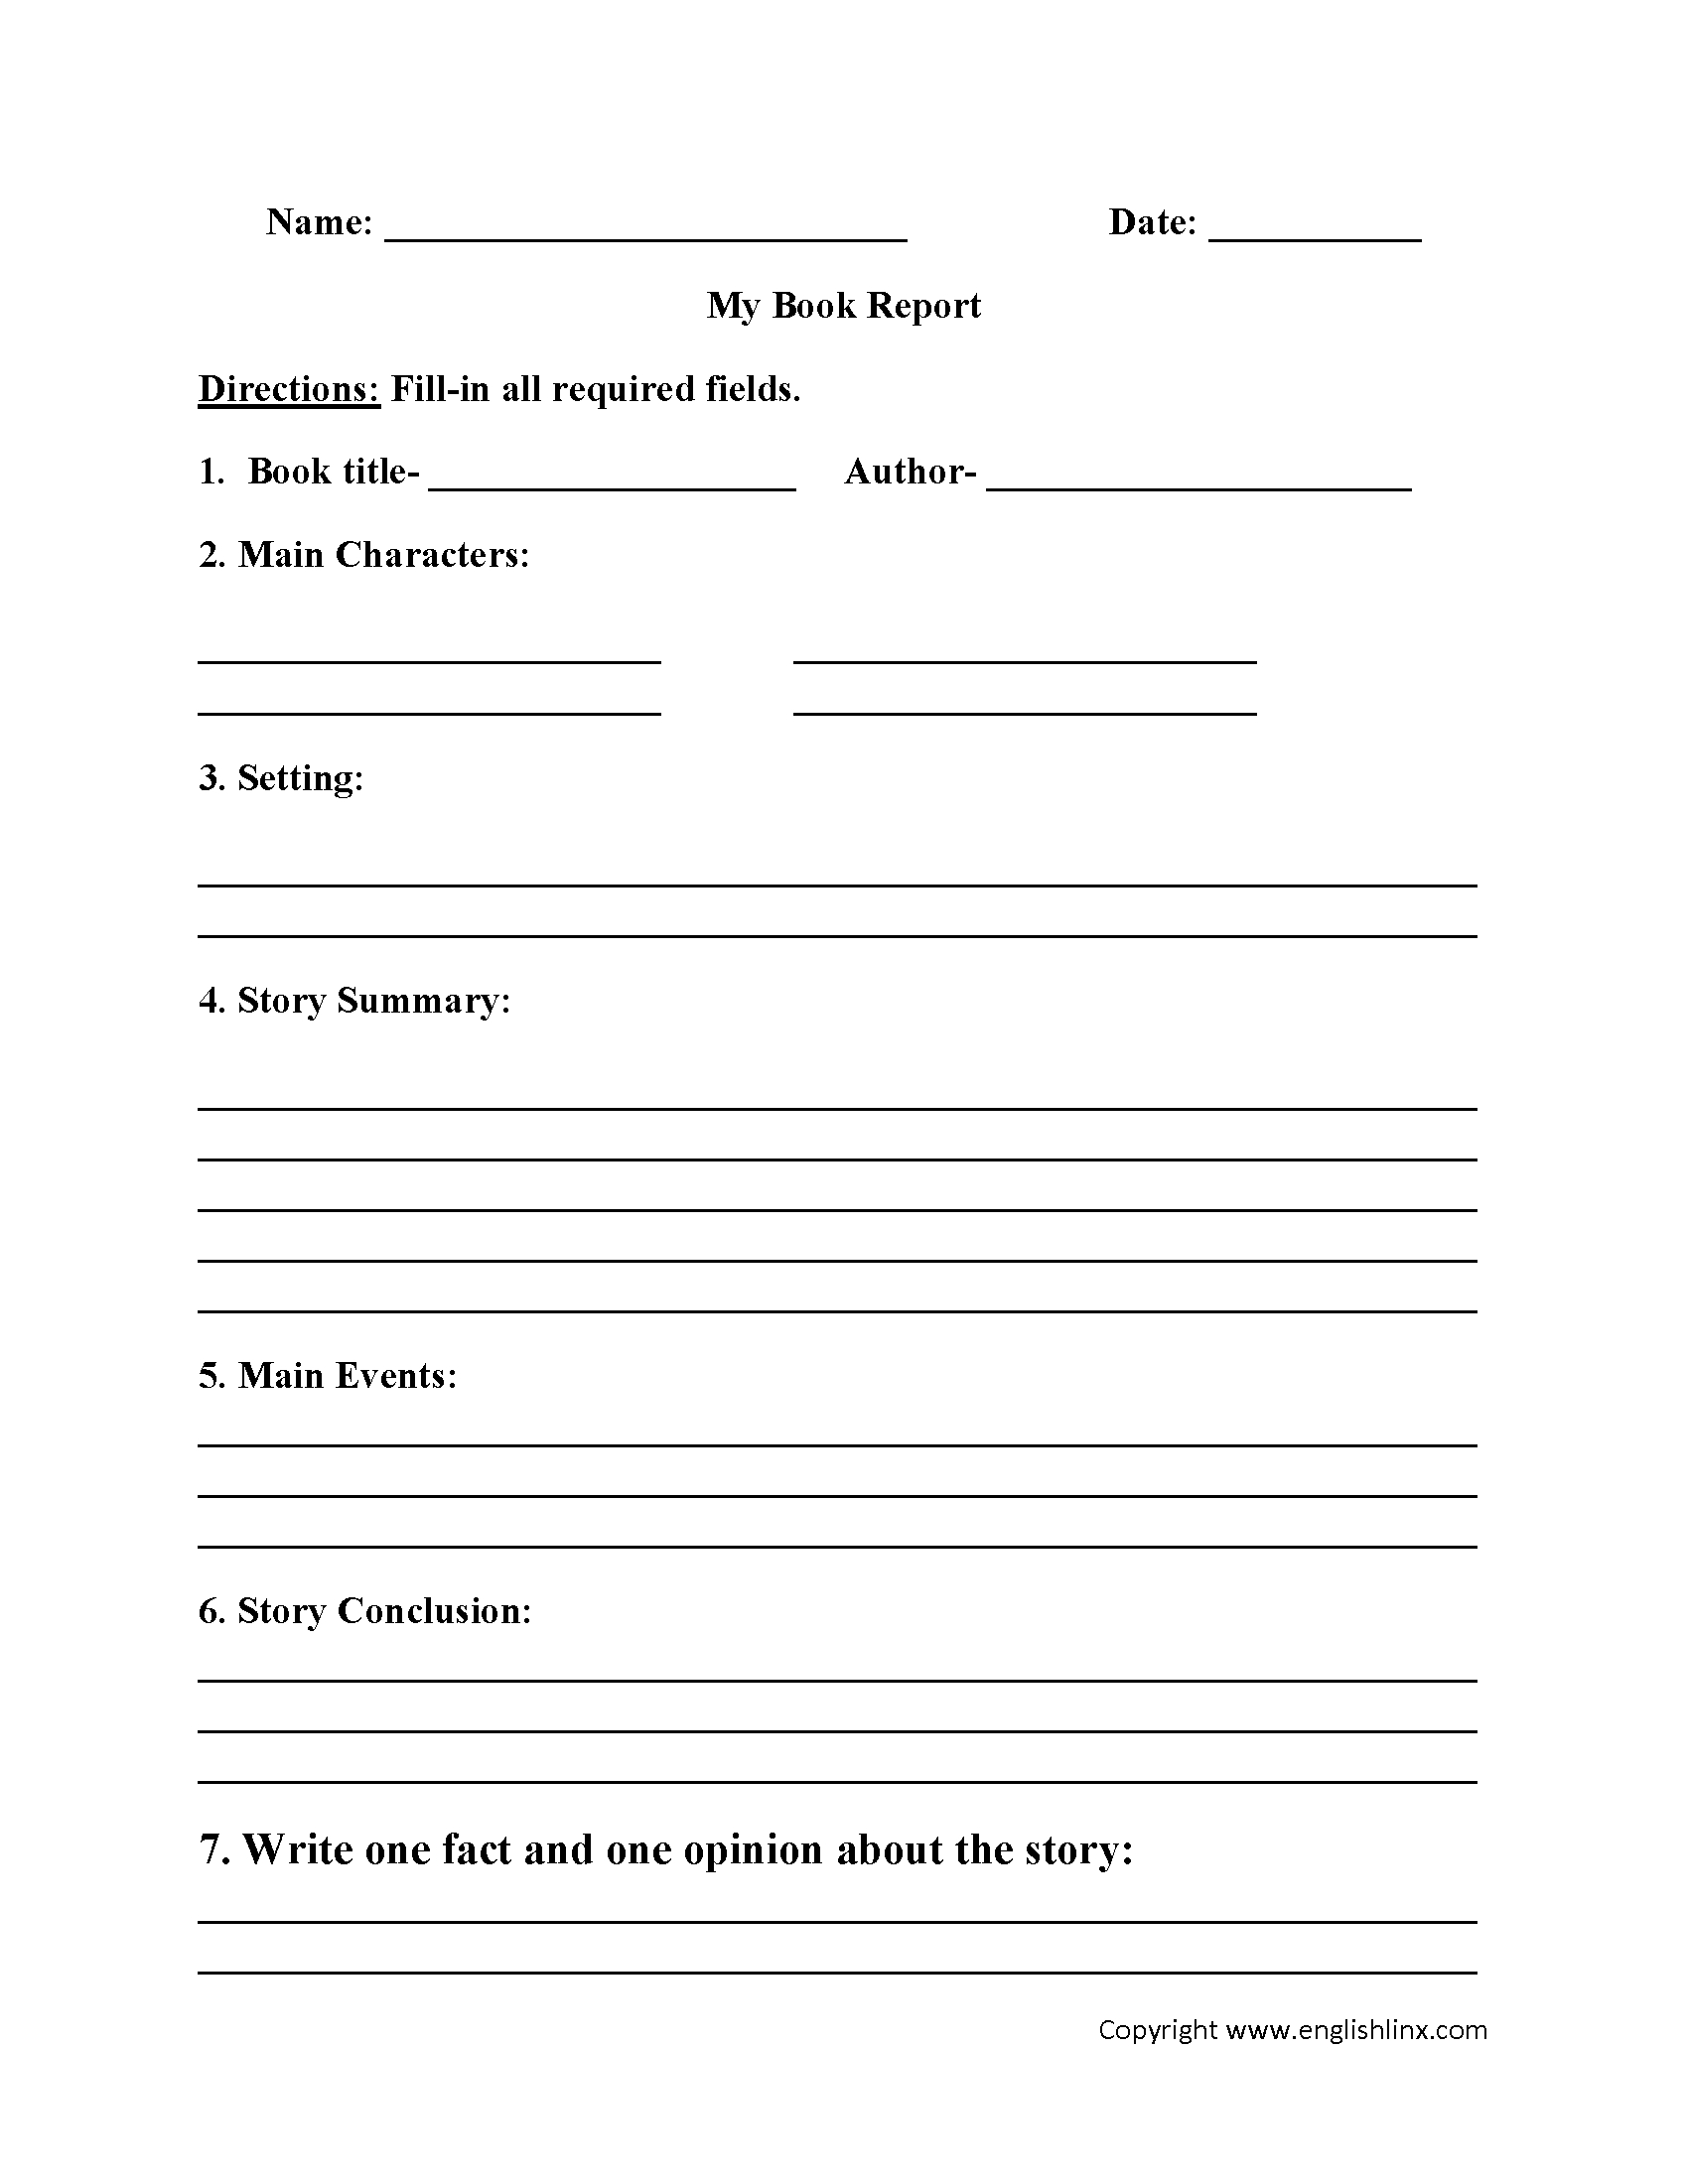 Englishlinx | Book Report Worksheets For Book Report Template High School